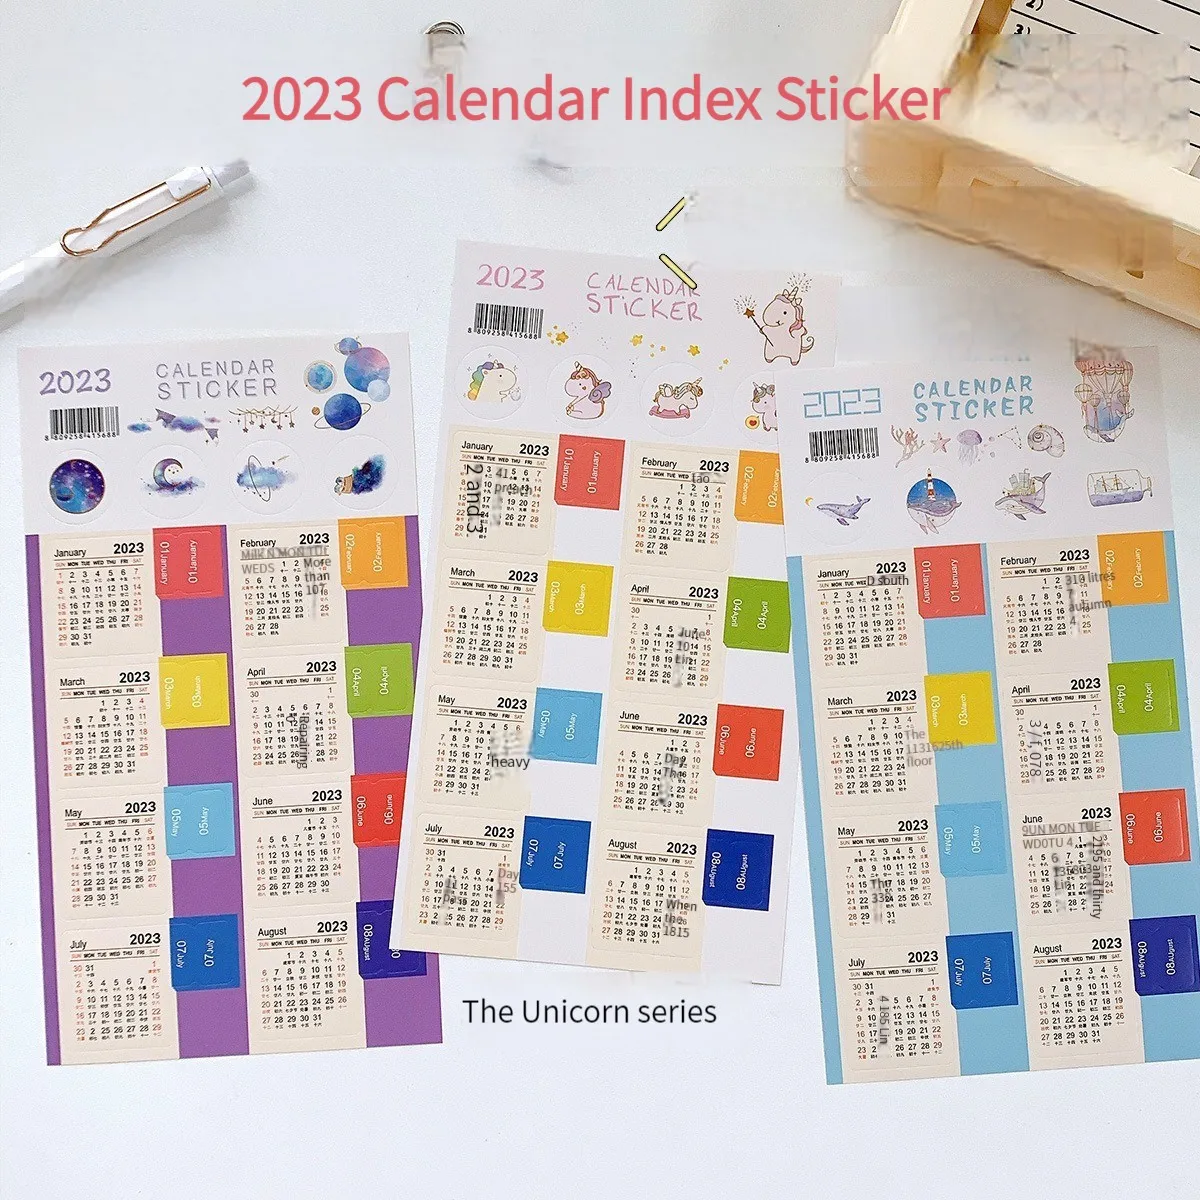 2Pcs/lot 2023 New Year Monthly Calendar Time Index Stickers Decorative Kawaii Stickers for Diary Planner Notebooks Stationery